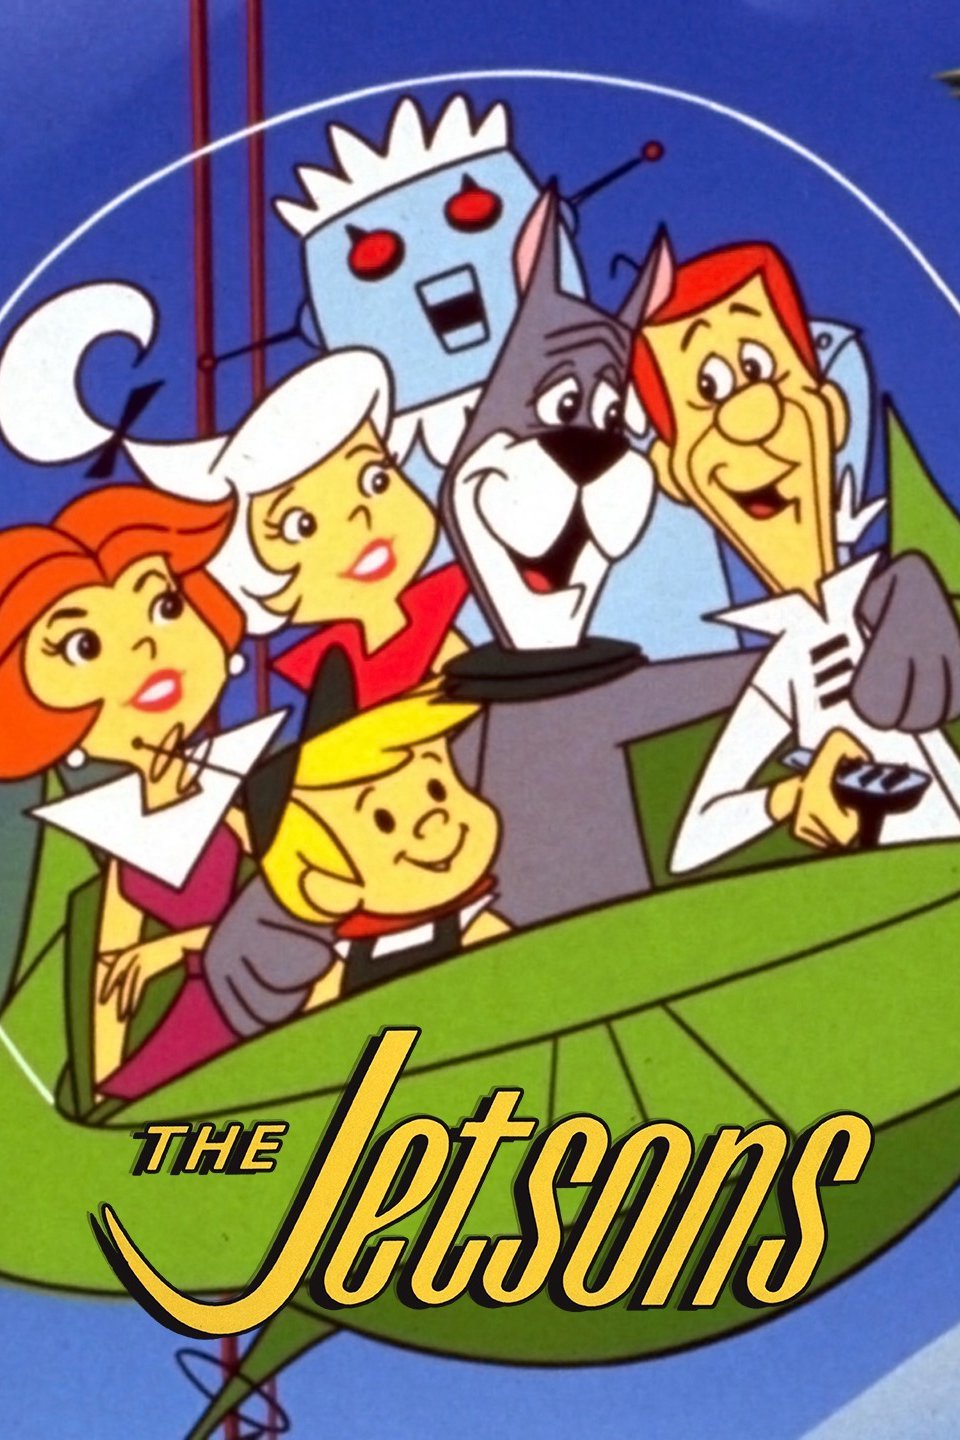 THE JETSONS ANIMATED TV SERIES CAST IN FLYING CAR & ROSIE ROBOT  PUBLICITY PHOTO 